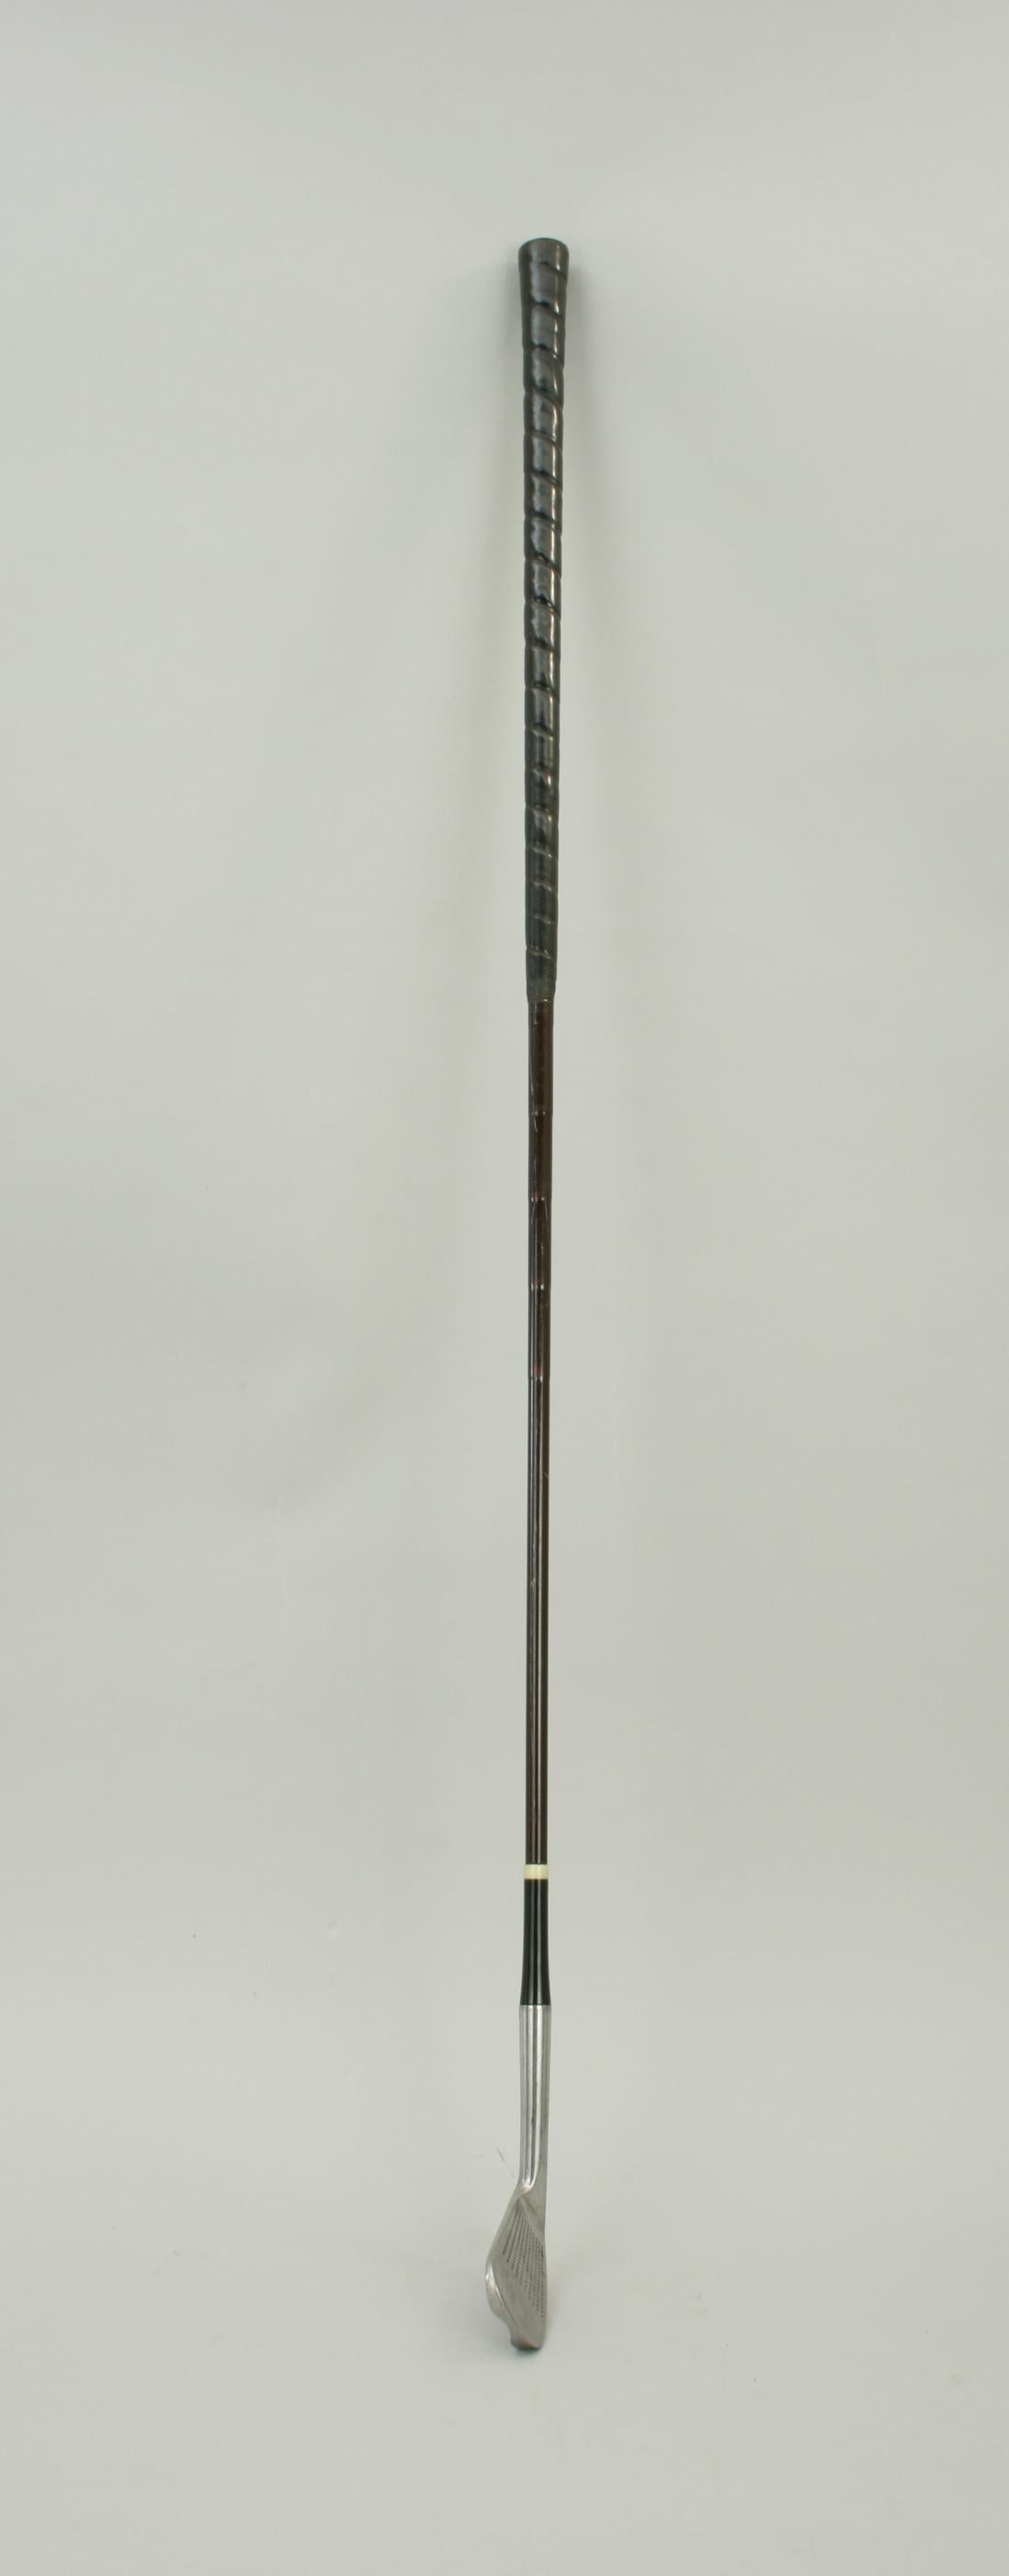 Steel shafted Tom Morris golf club.
An early steel shafted golf club, No. 4 iron, stamped Tom Morris, St Andrews. The club head has a curved hollowed back and is stamped 'Walker Cup Model' with no. 4 iron on the sole. It is with the original